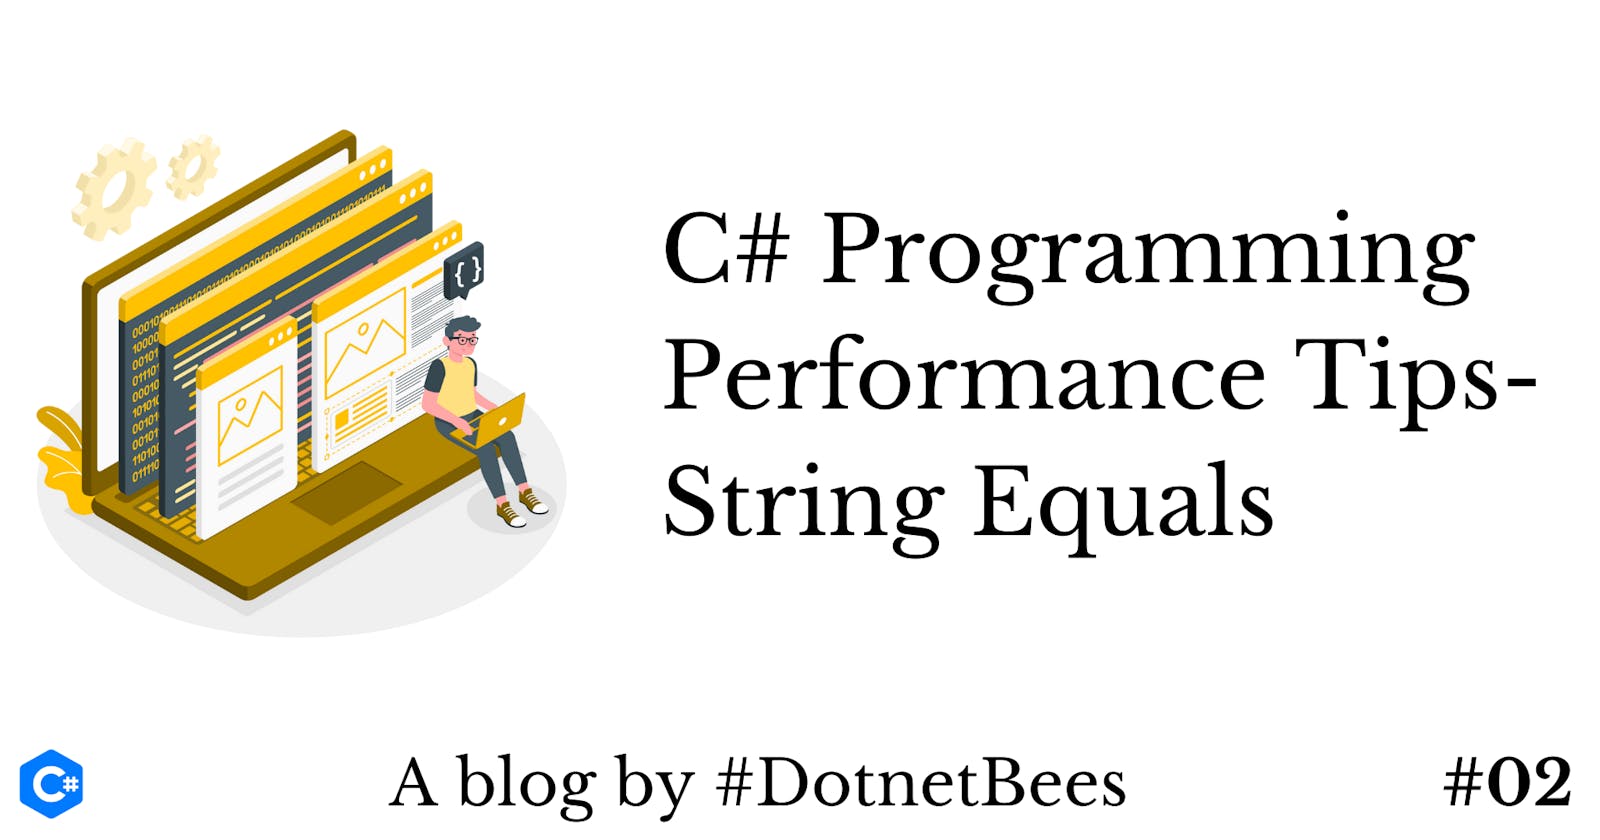 C# Programming Performance Tips - String Equals